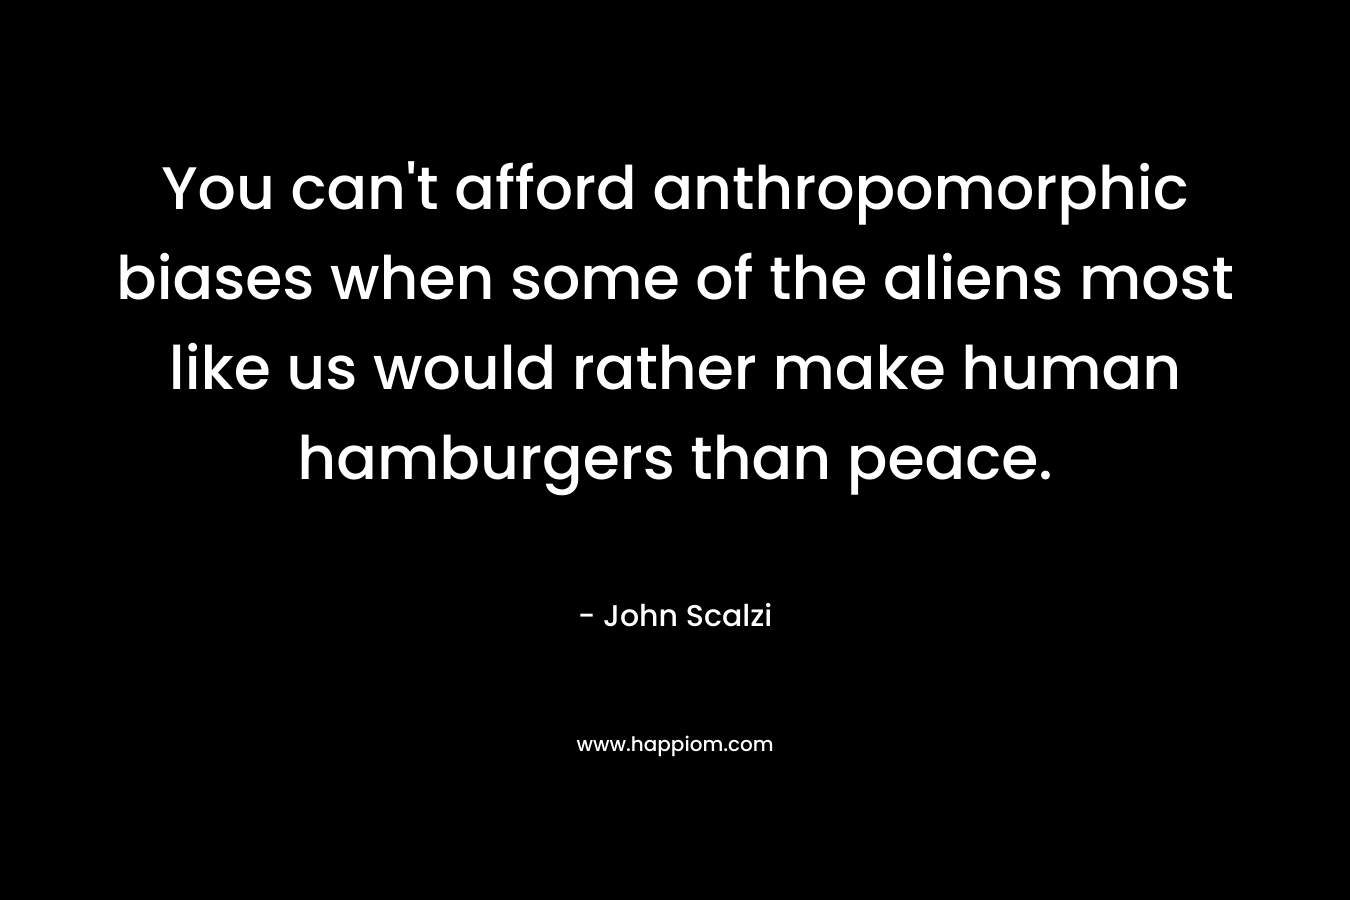 You can't afford anthropomorphic biases when some of the aliens most like us would rather make human hamburgers than peace.